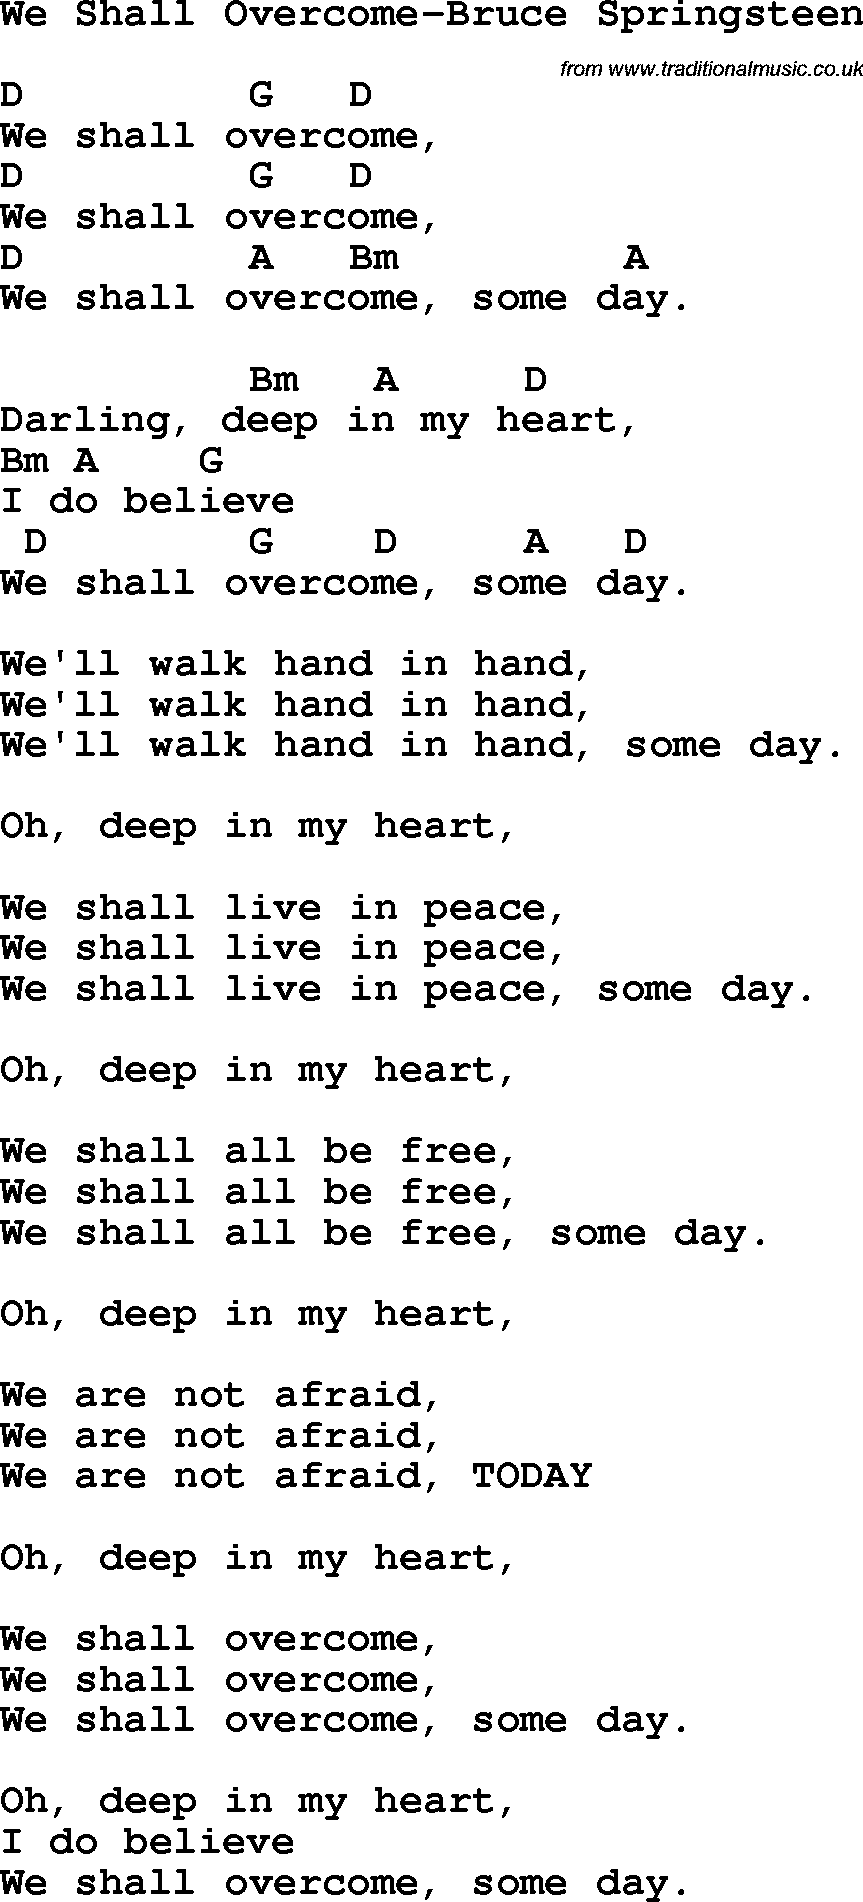 Protest Song We Shall Overcome-Bruce Springsteen lyrics and chords